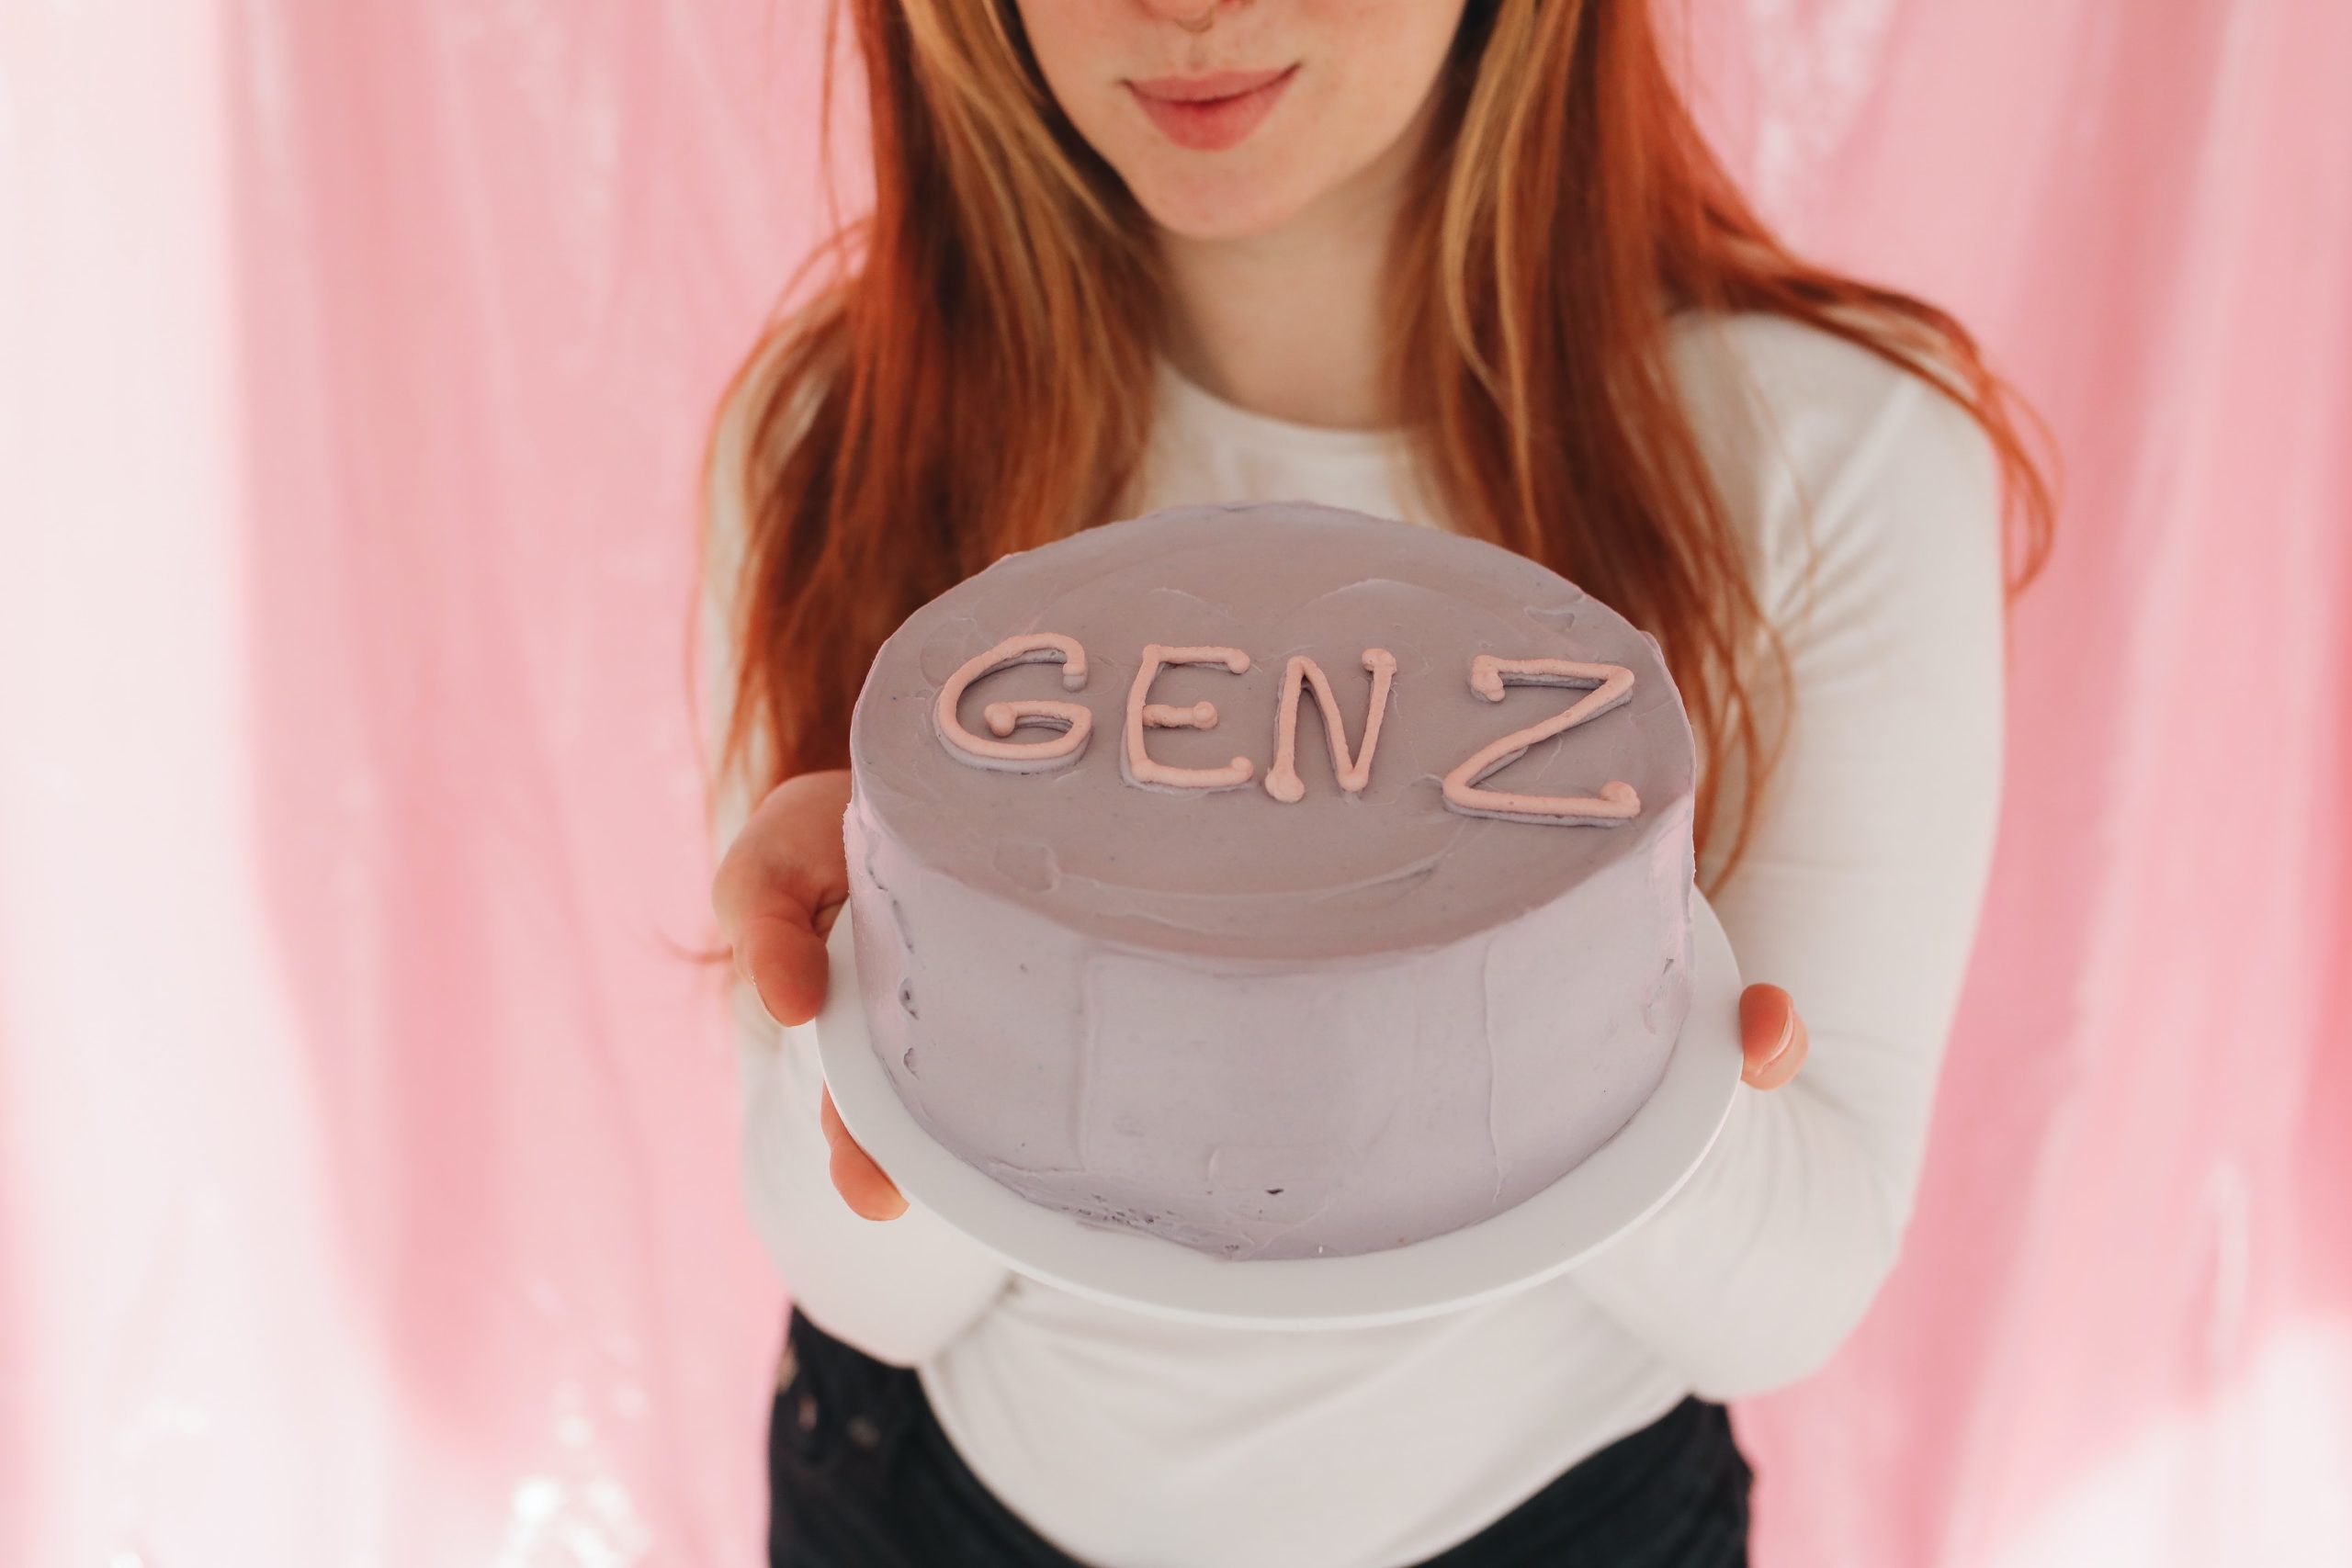 Person holding a Gen Z cake